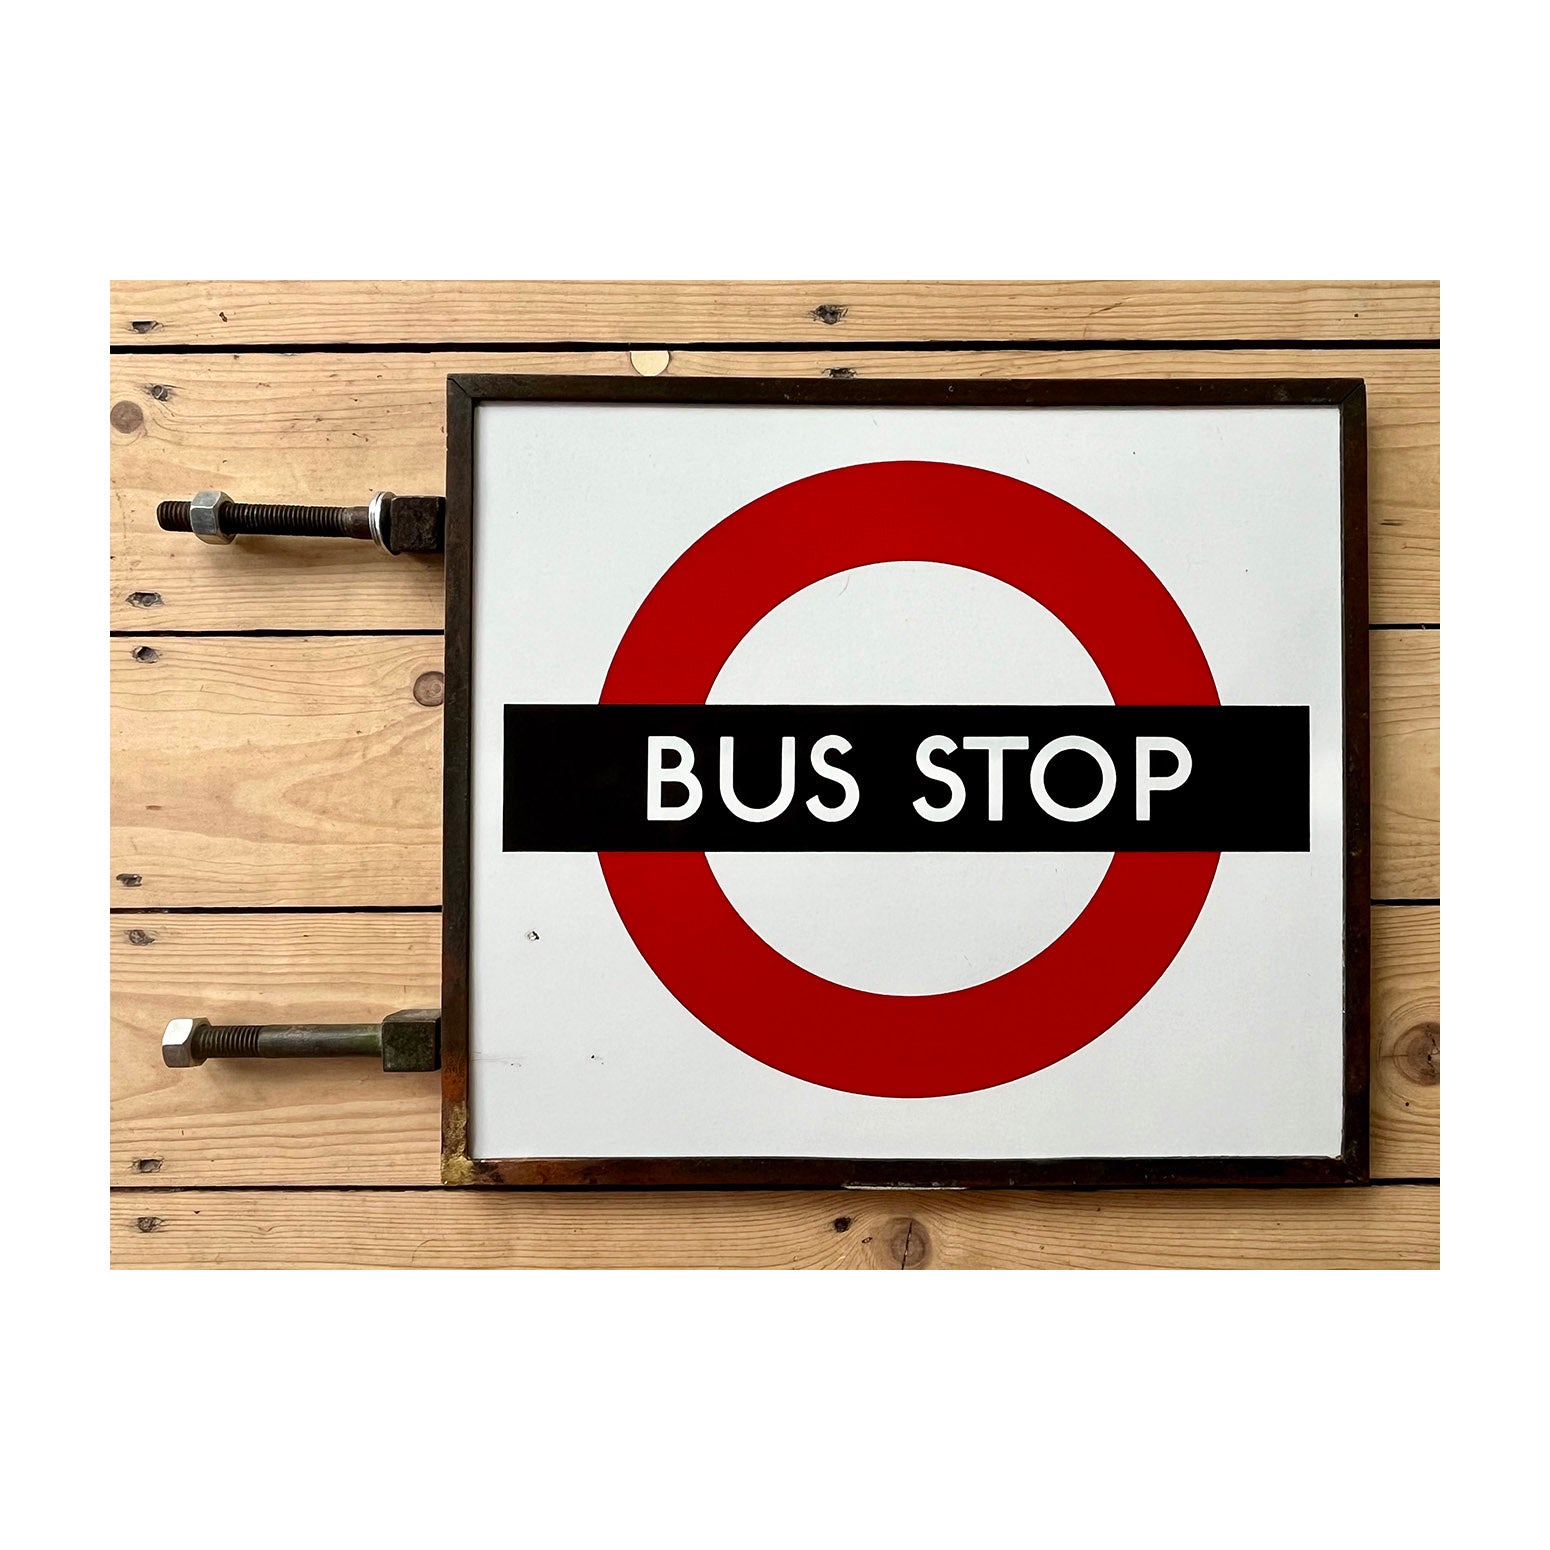  London Transport (LT) double sided, bronze framed, enamel bus stop flag, c. 1950. This is the truly iconic version of the LT bus stop sign, introduced in the 1930s. 